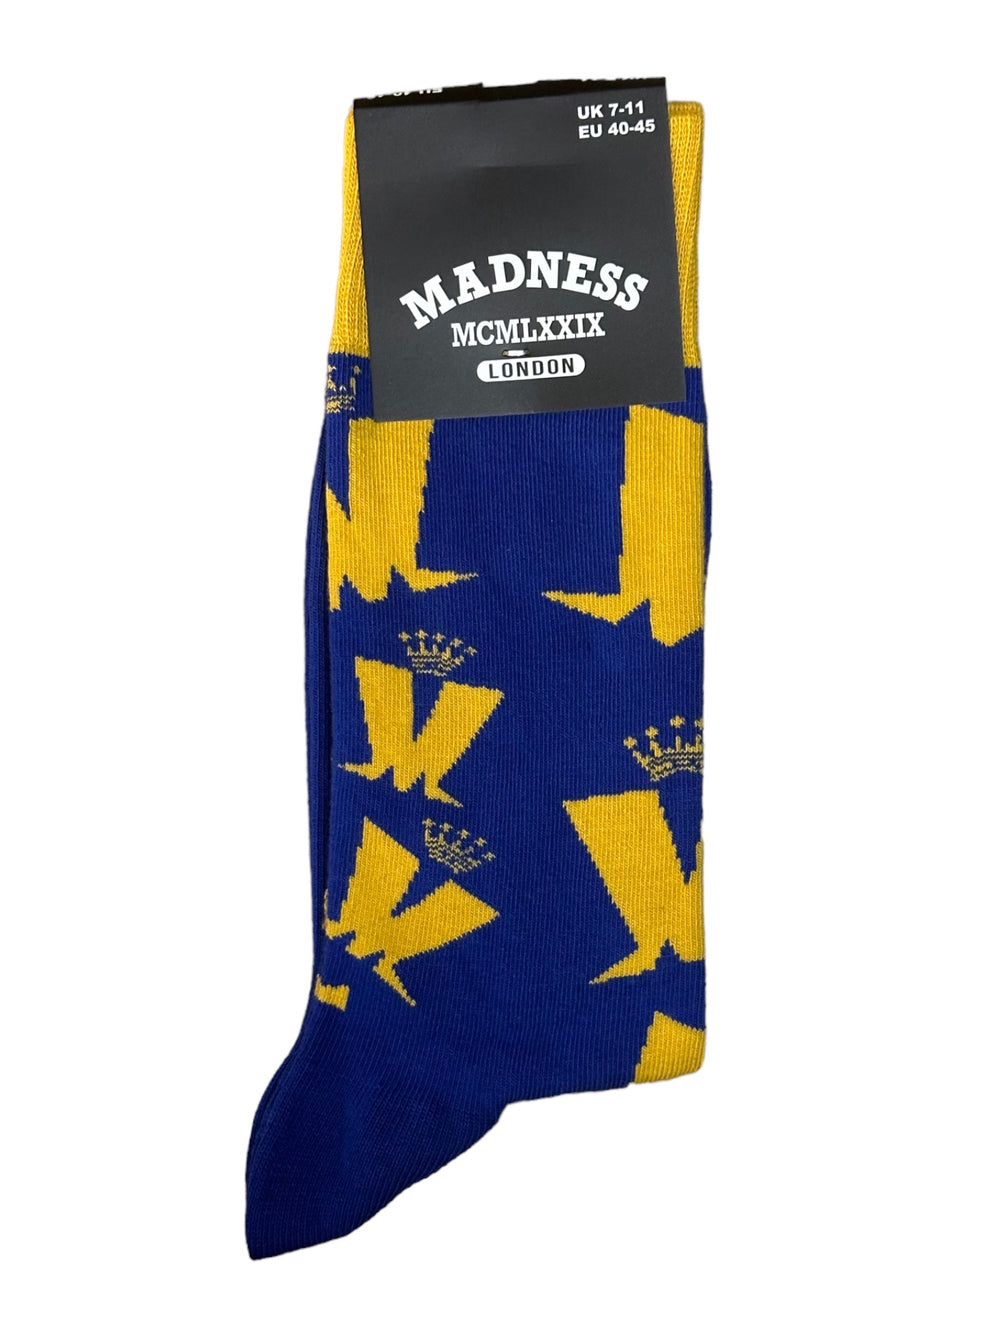 Madness - Crown & M  Pattern Official Product 1 Pair Jacquard Socks Brand New